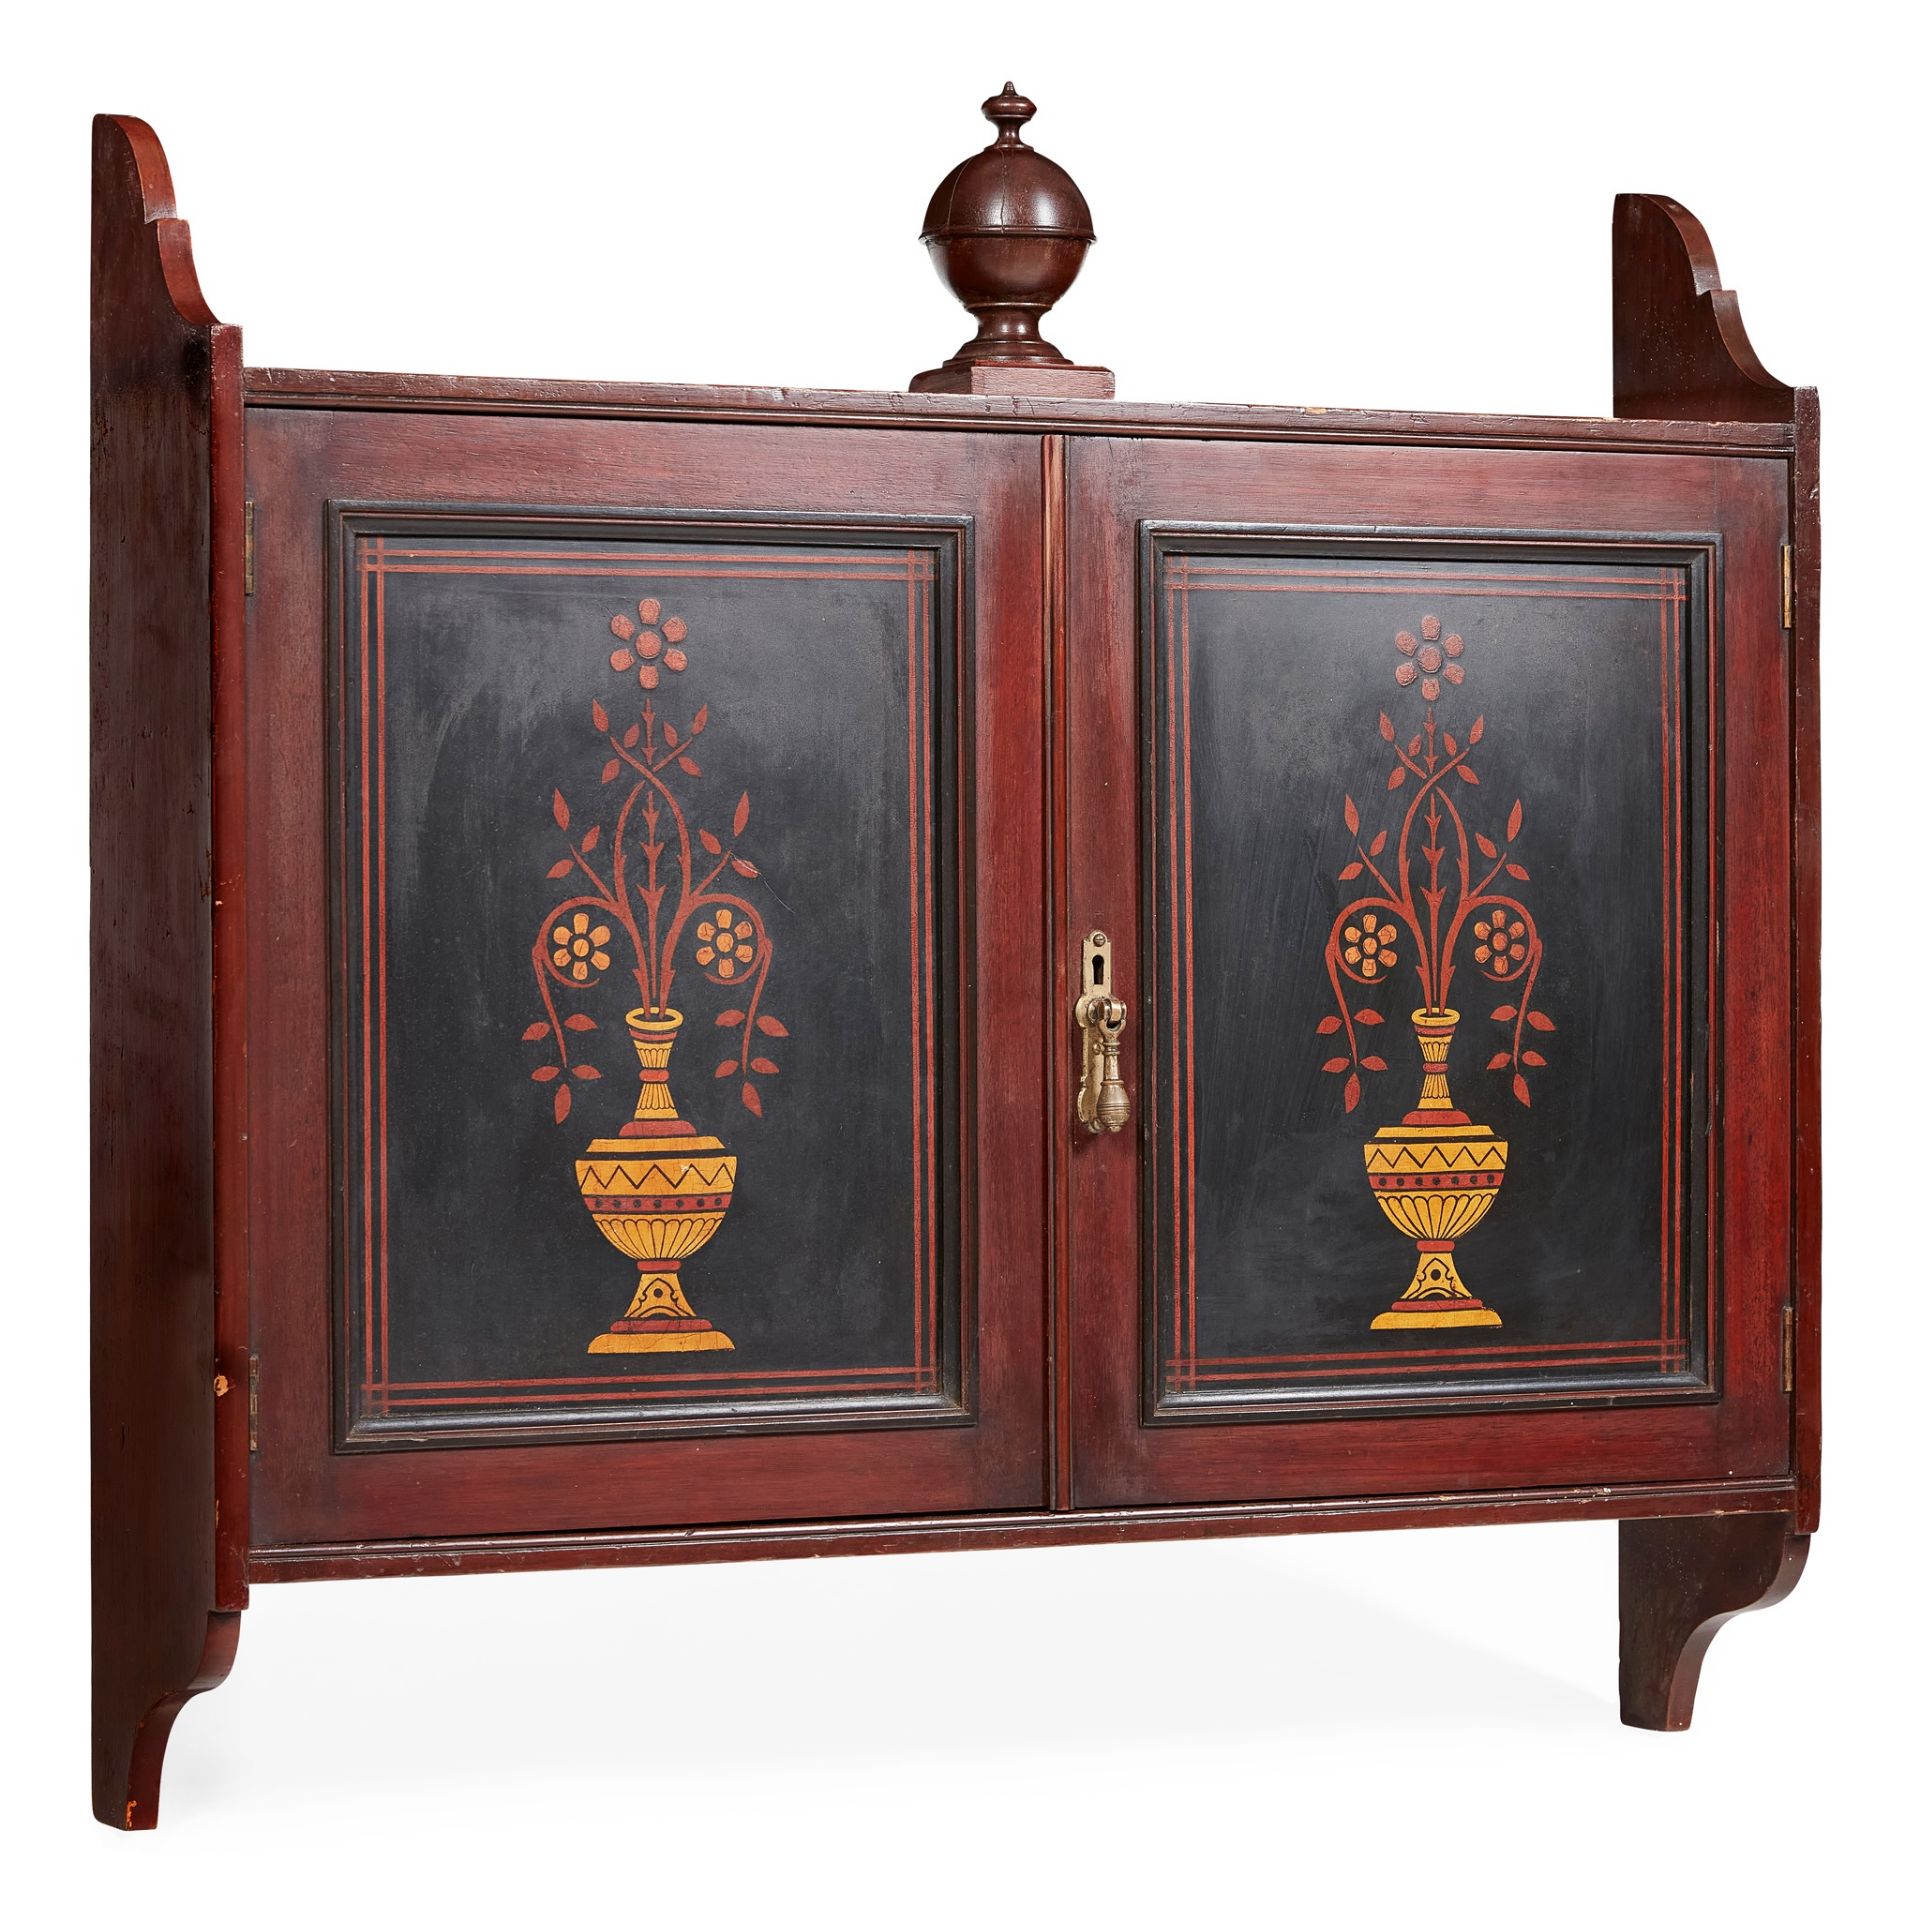 MANNER OF COTTIER & CO. AESTHETIC MOVEMENT WALL CABINET, CIRCA 1890 - Image 2 of 2